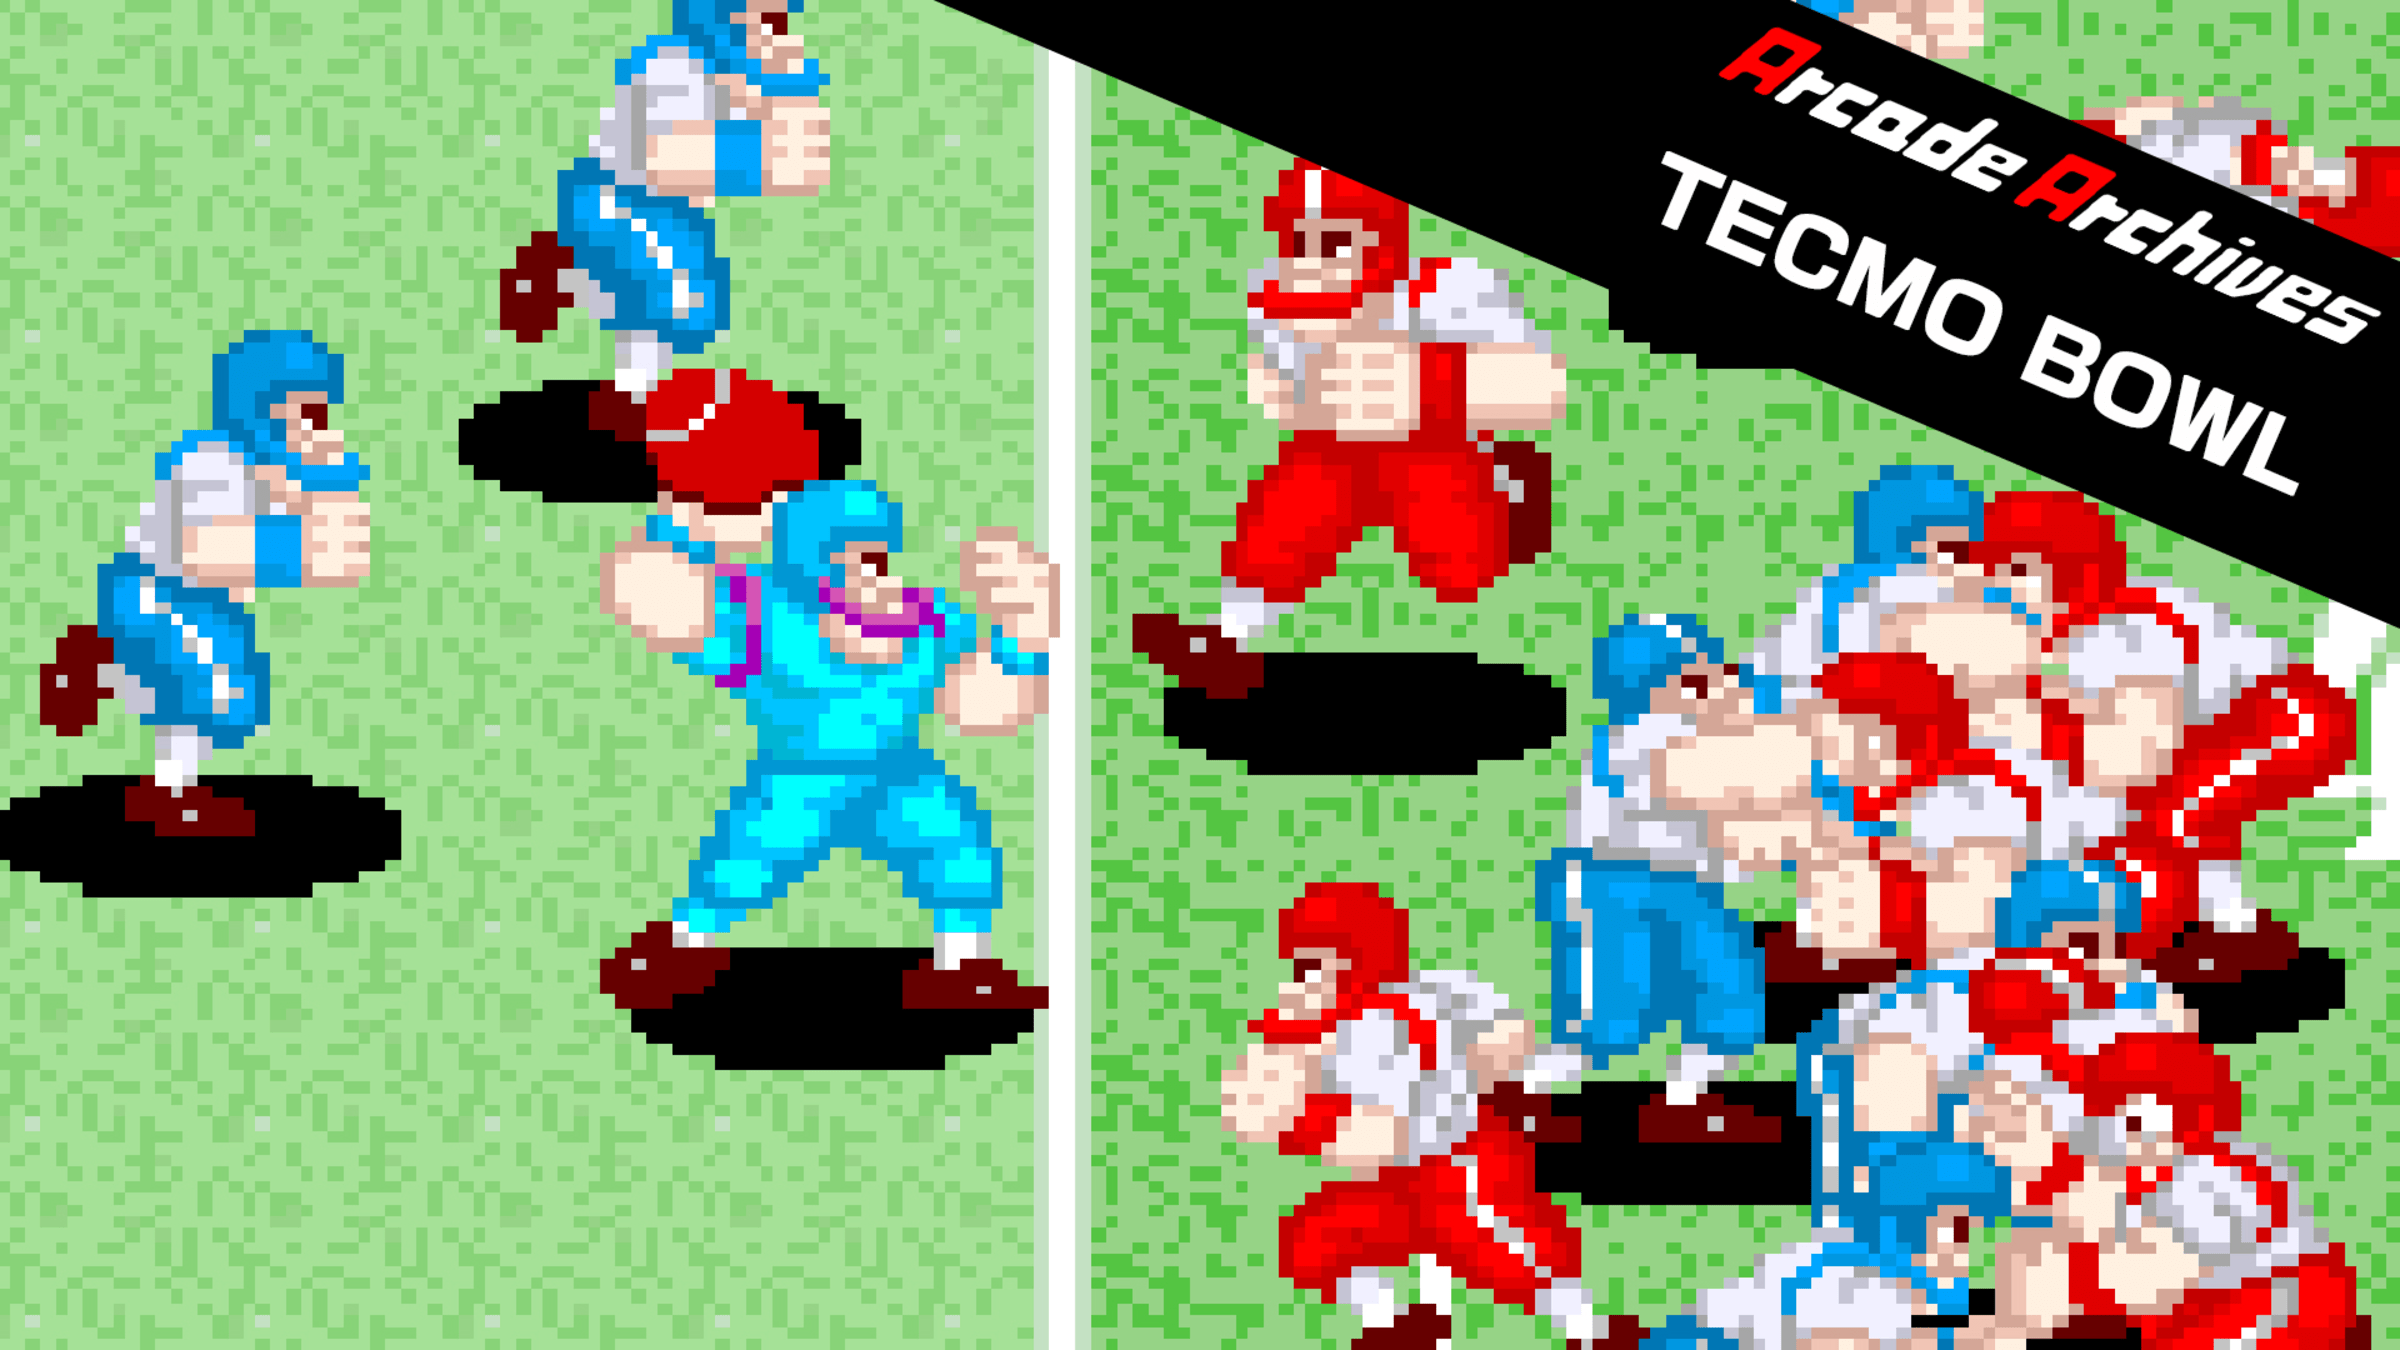 Arcade Archives TECMO BOWL for Nintendo Switch